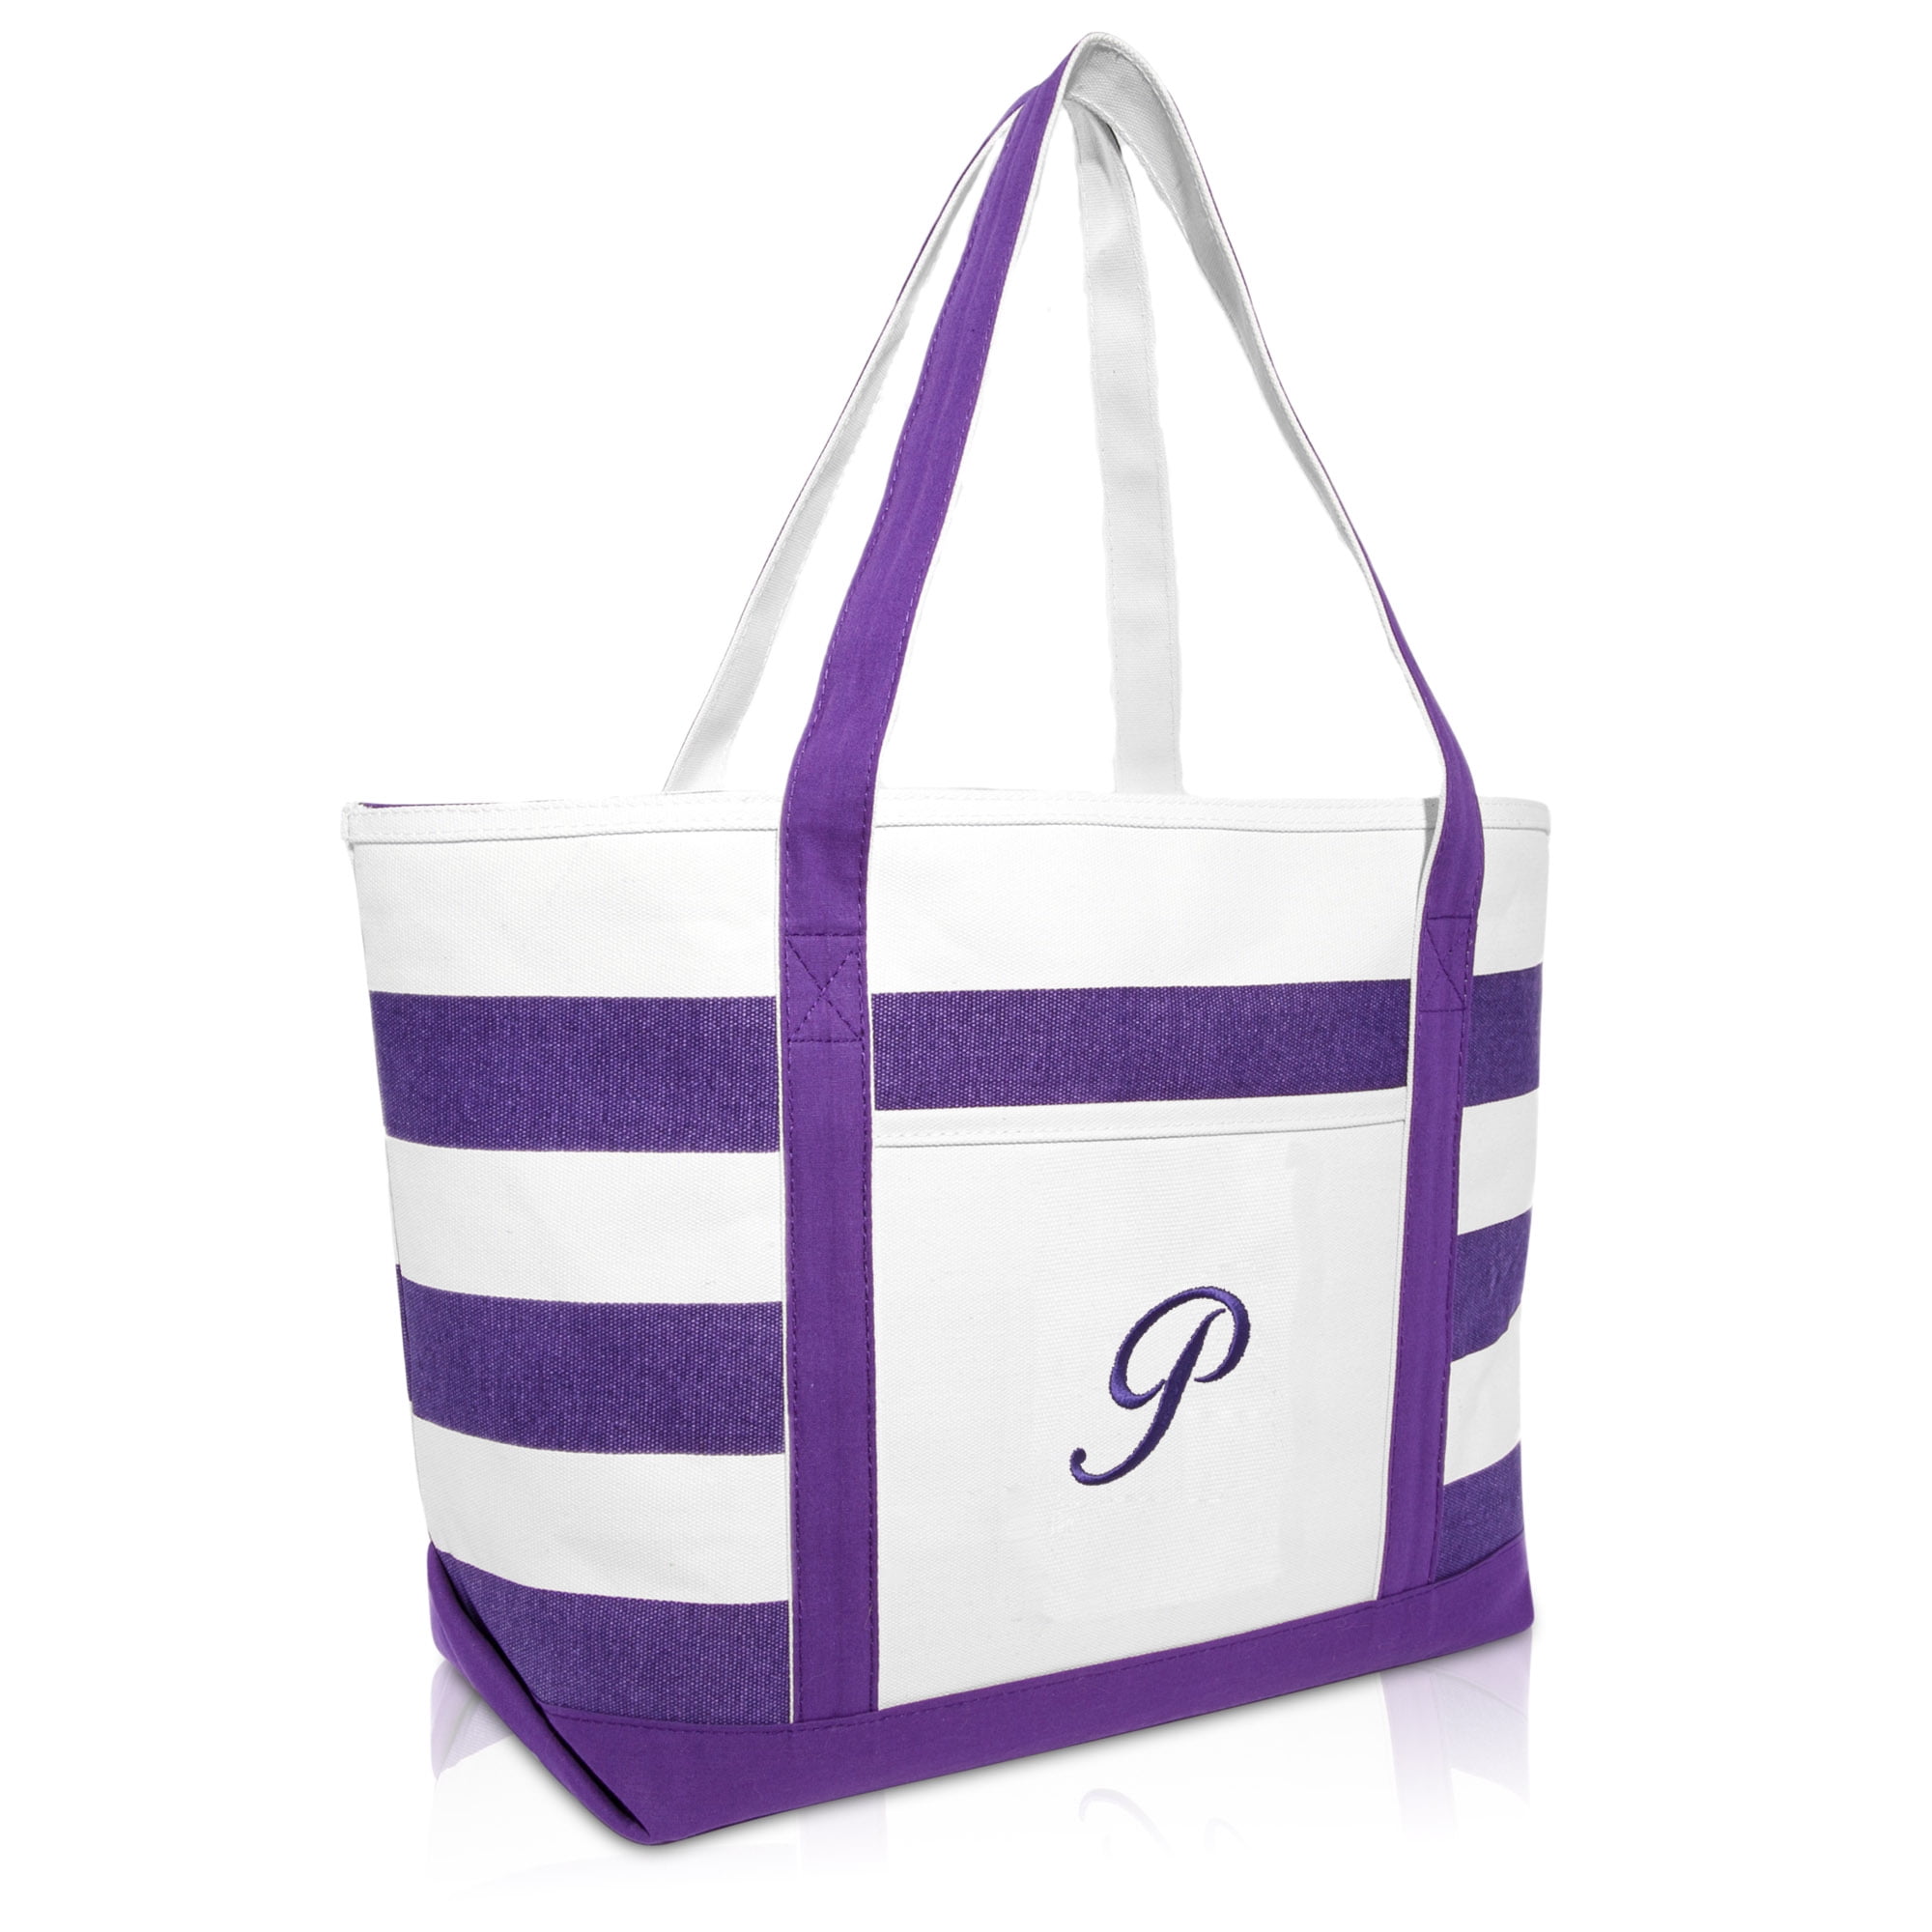 DALIX Monogrammed Beach Bag and Totes for Women Personalized Gifts Purple P - www.semadata.org ...